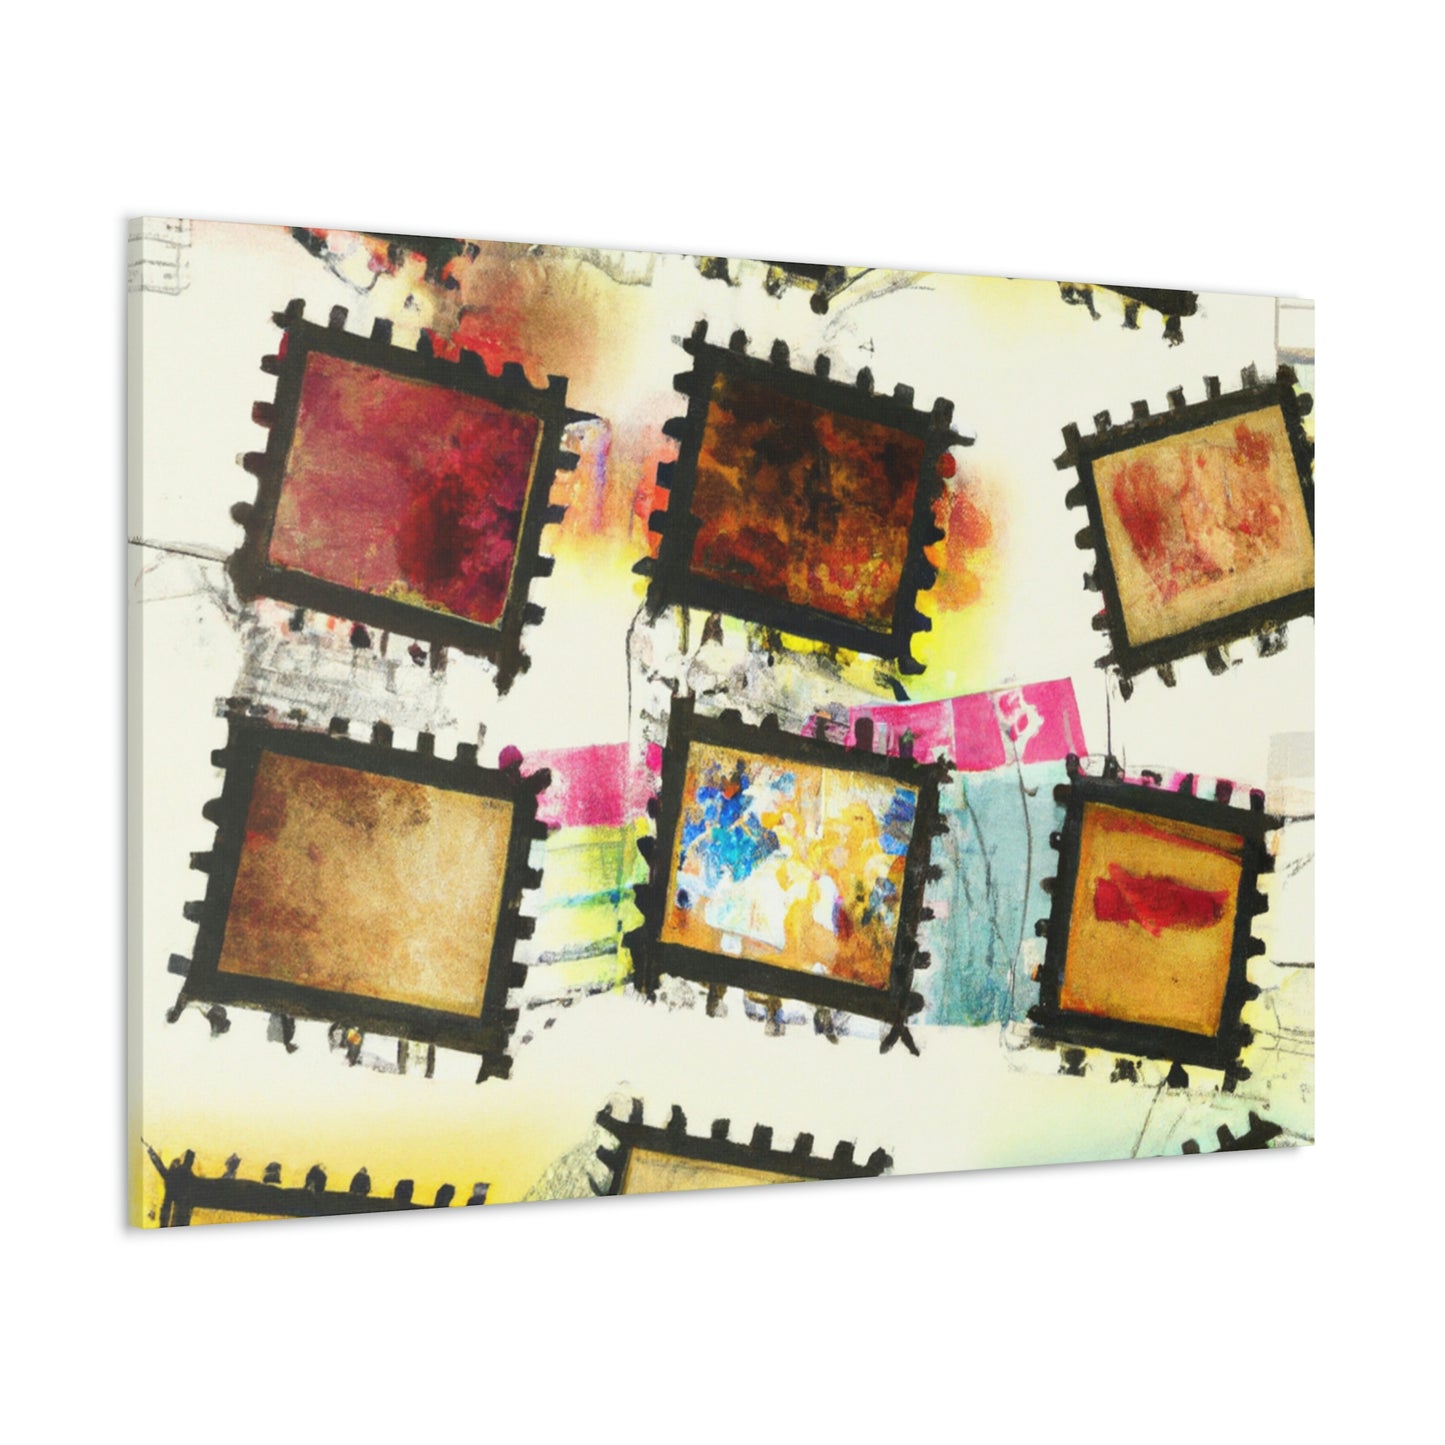 World Tour Postage Stamps. - Postage Stamp Collector Canvas Wall Art